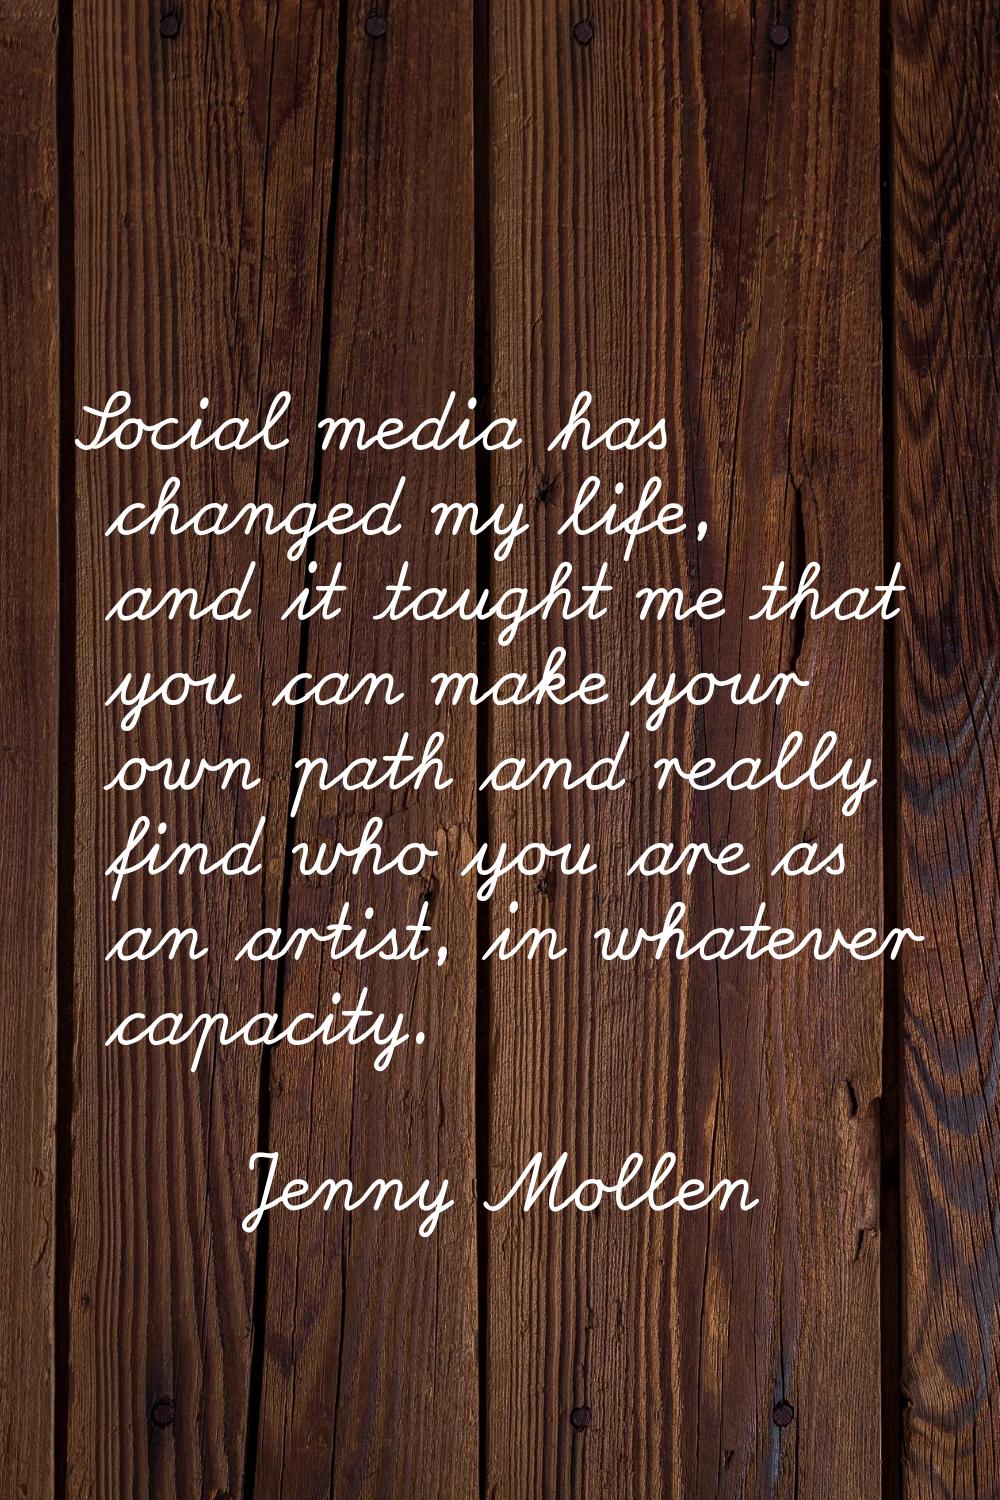 Social media has changed my life, and it taught me that you can make your own path and really find 